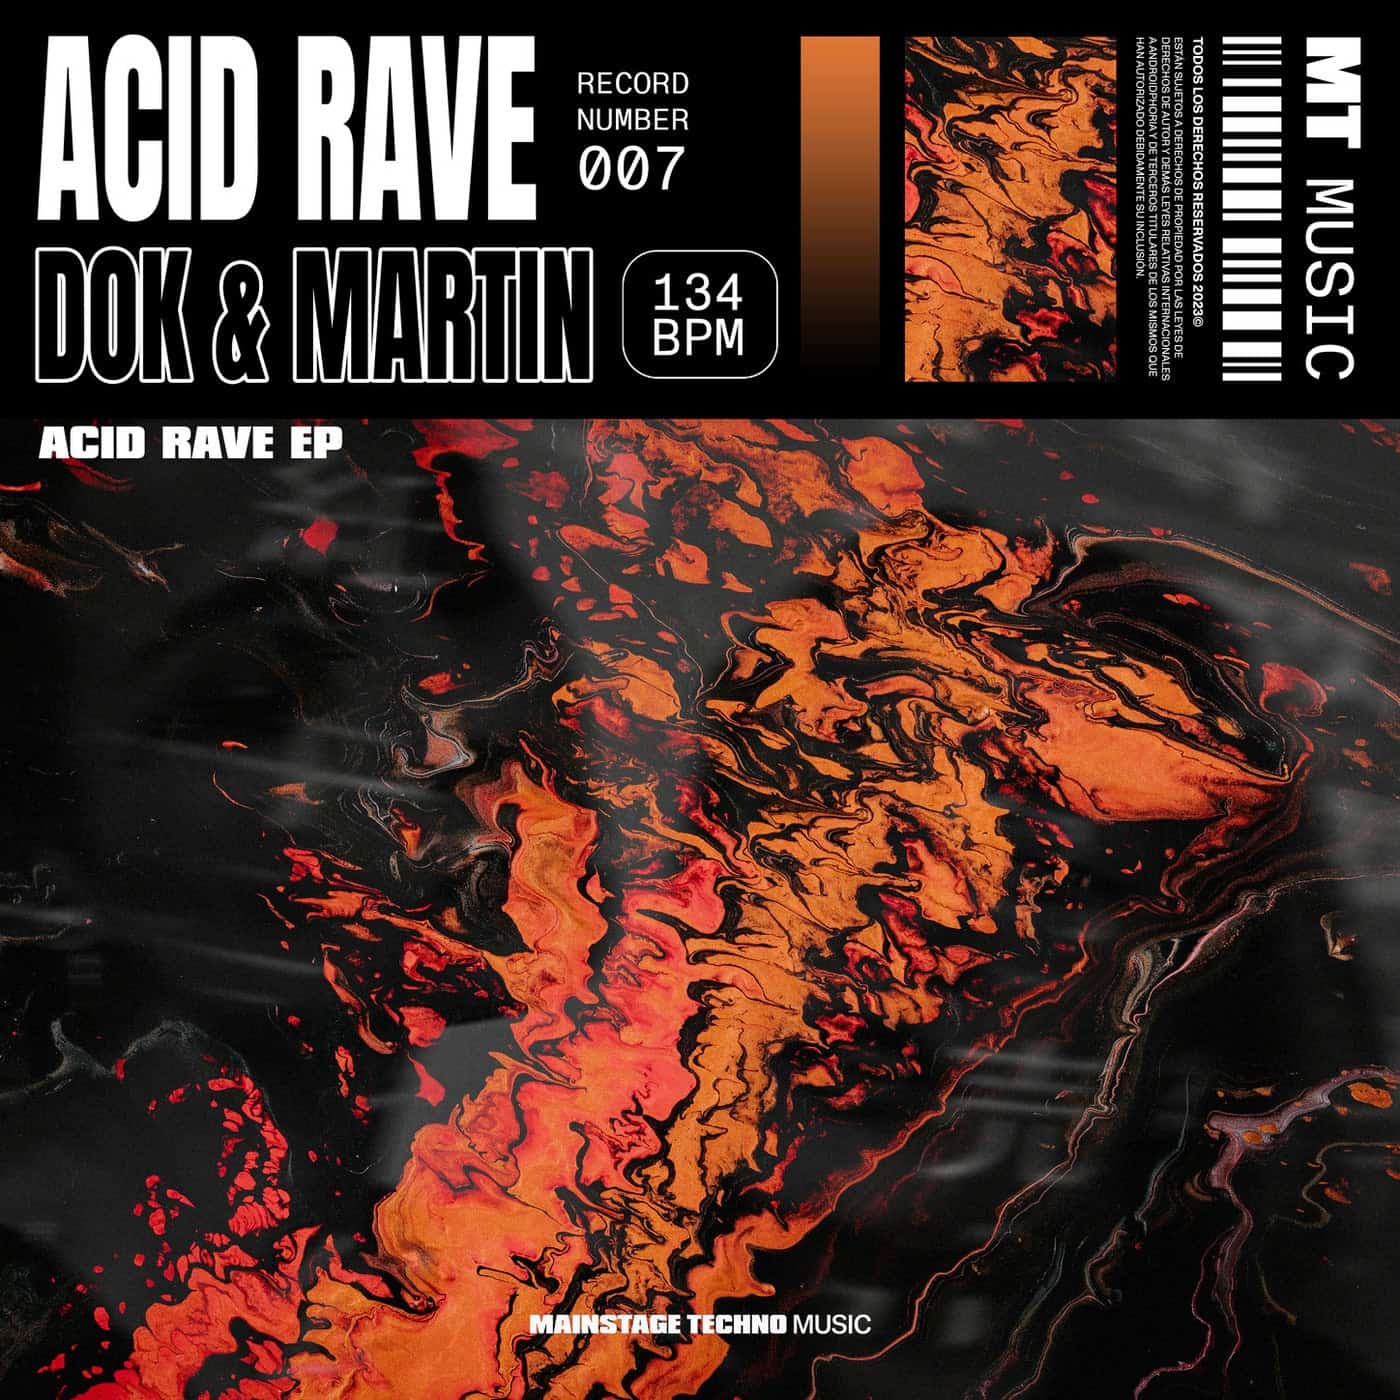 image cover: Acid Rave EP by Dok & Martin on Mainstage Techno Music